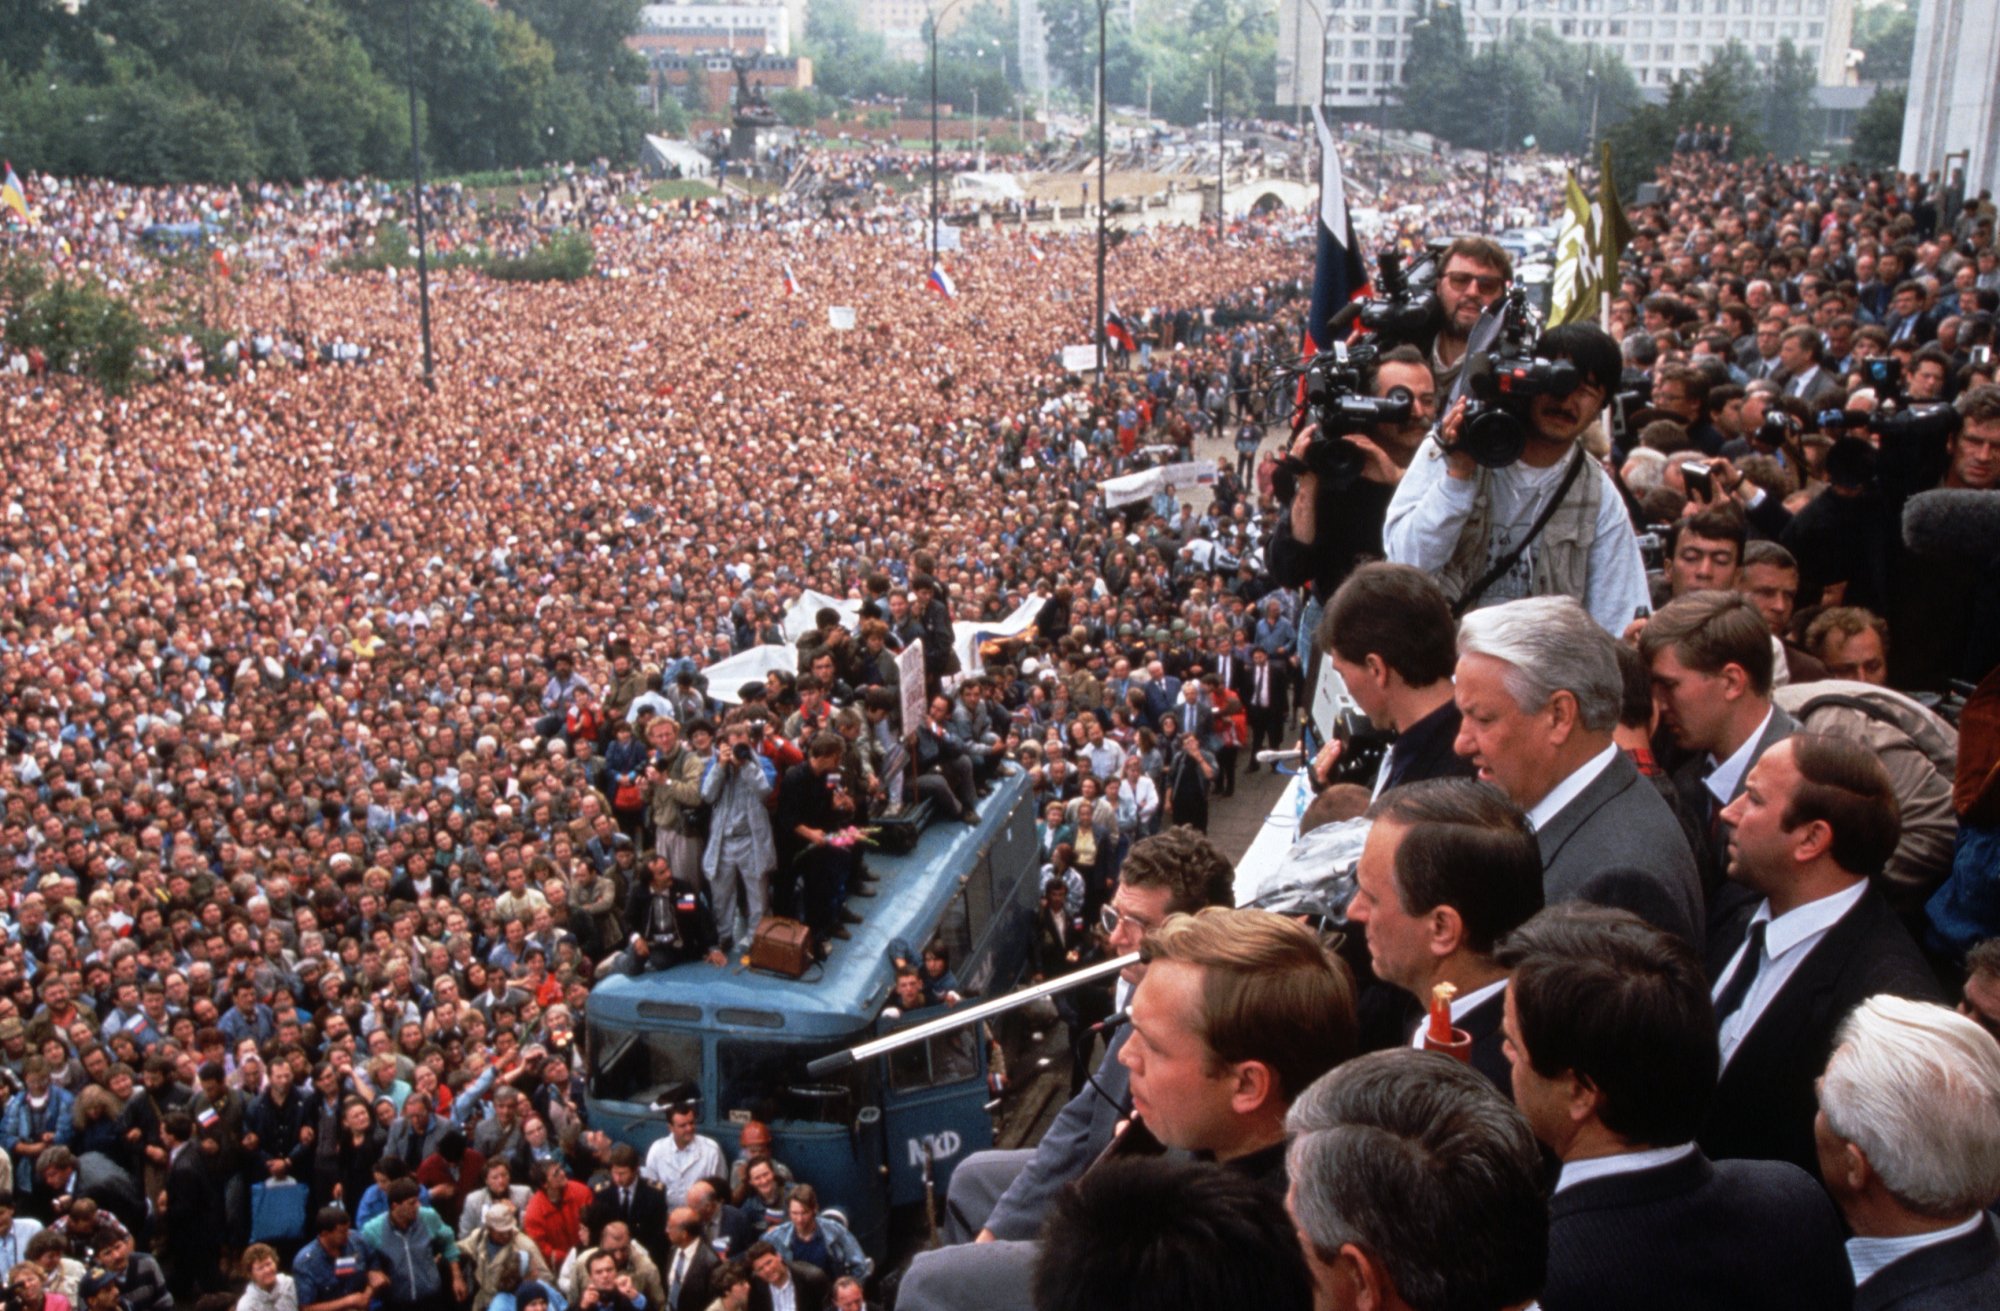 Boris Yeltsin addresses a massive Moscow crowd during the coup attempt